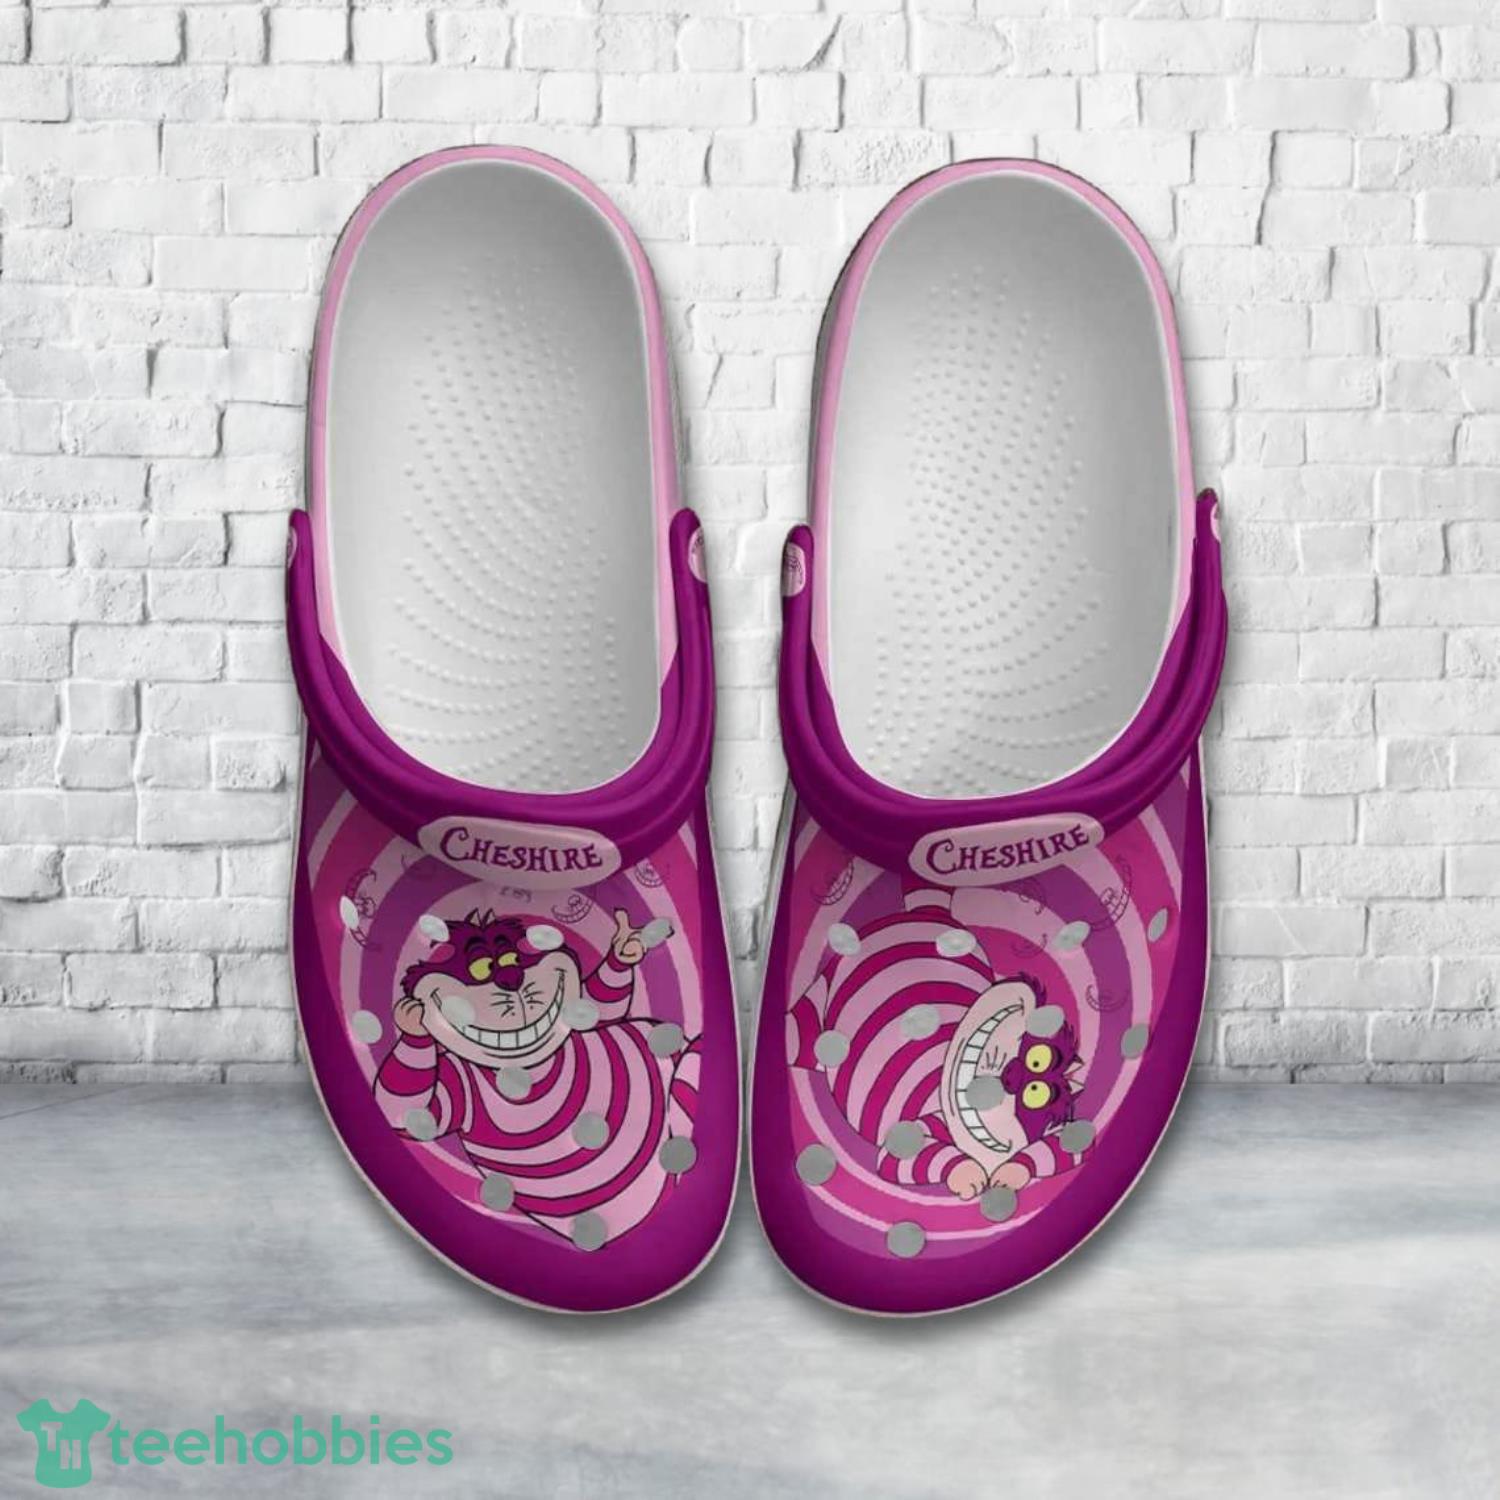 Chesire Cat Round Pink Disney Clog Shoes Product Photo 1